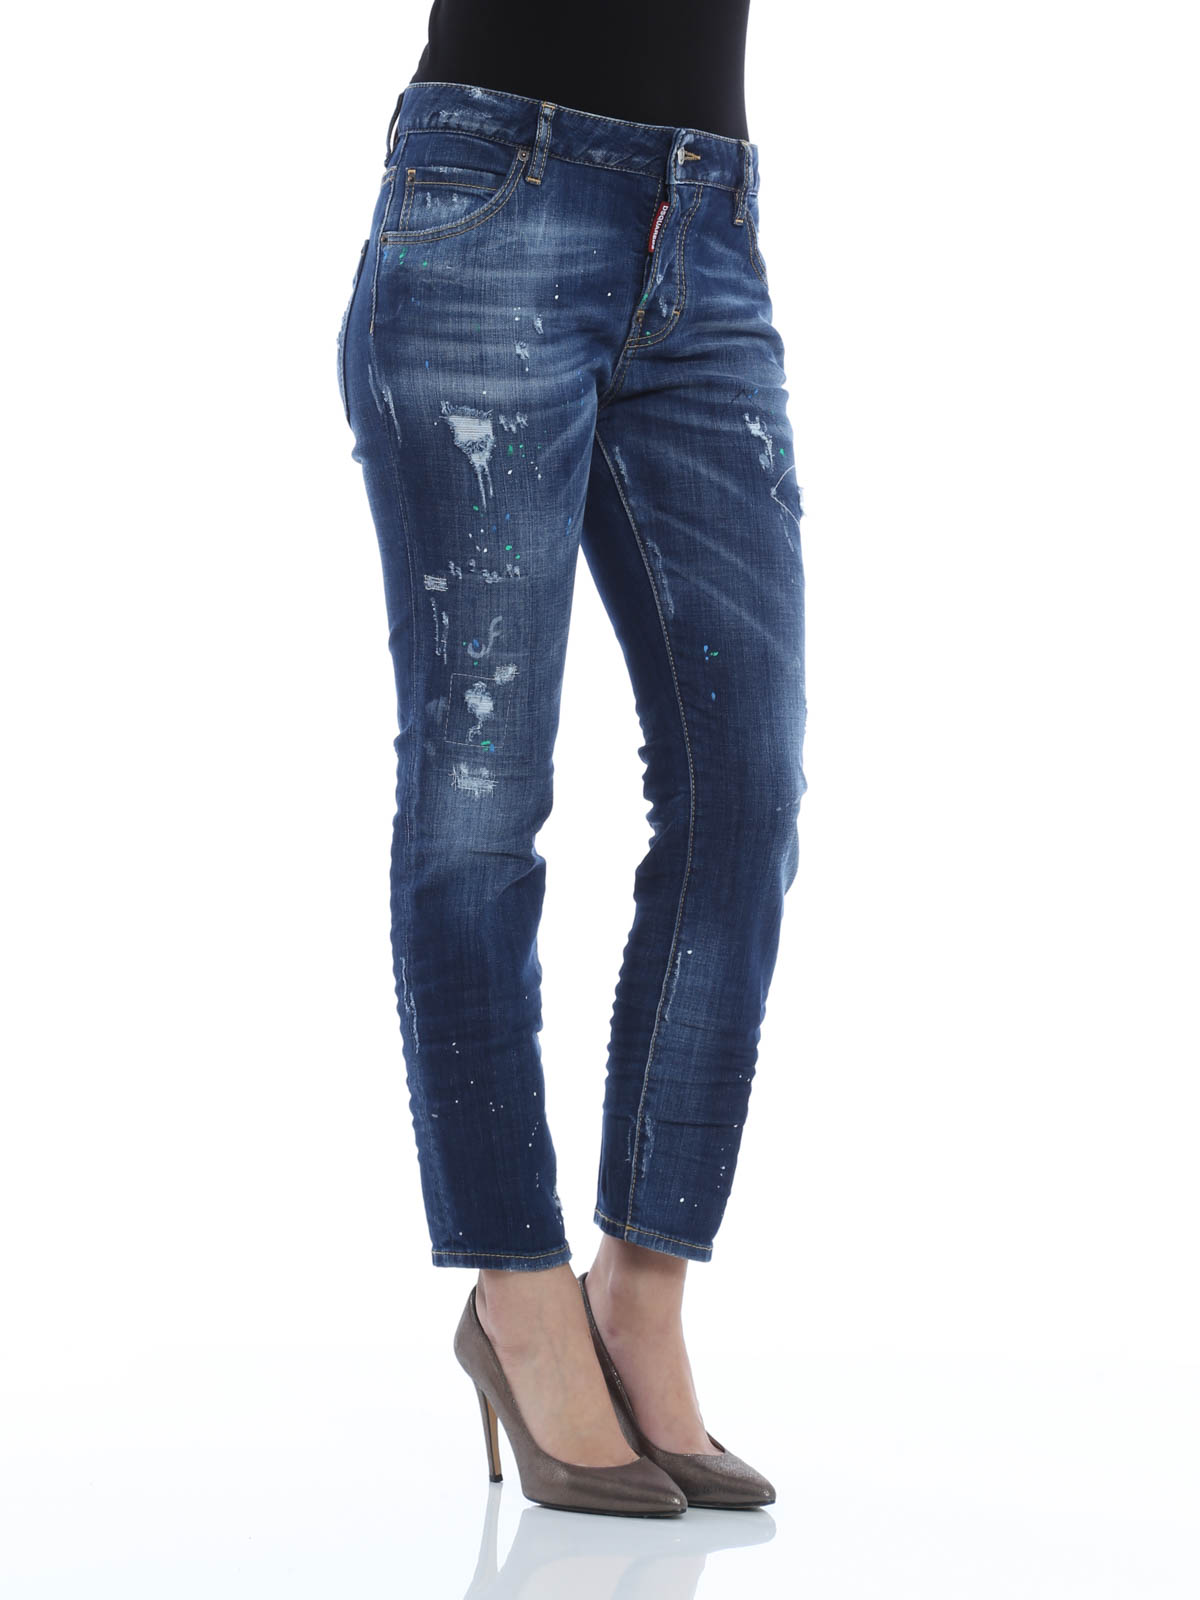 dsquared2 cool girl jeans